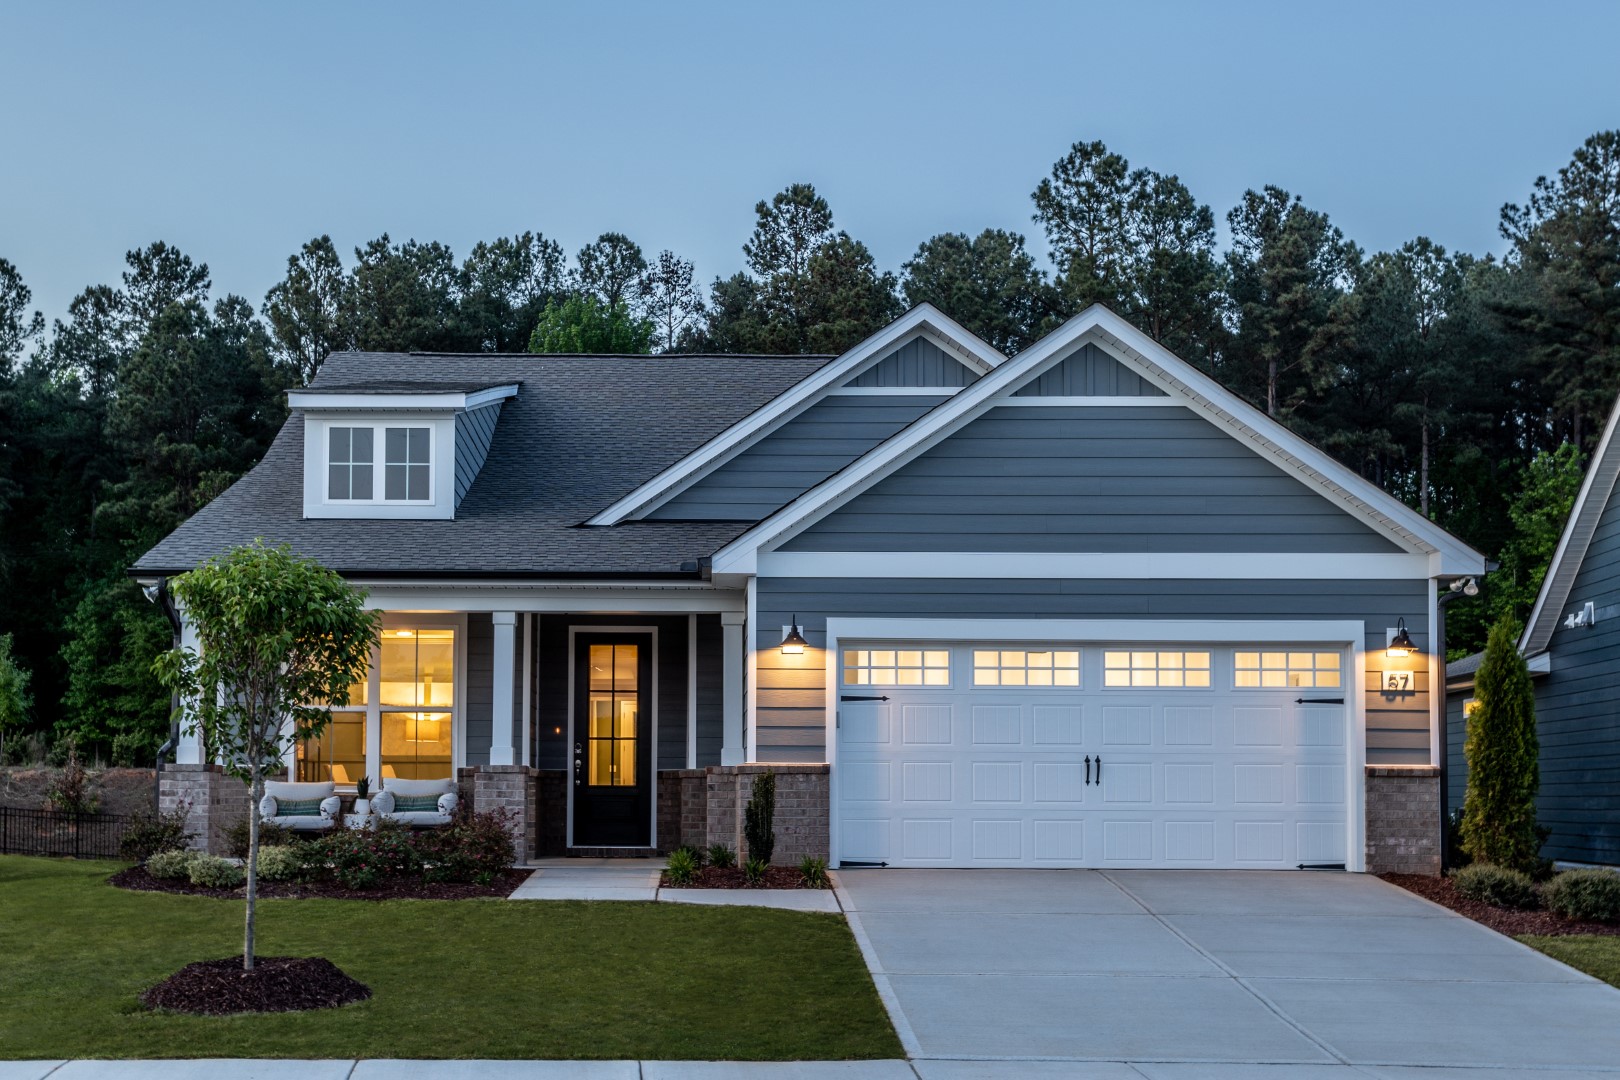 New Homes near Raleigh NC | Carolina Overlook by Del Webb